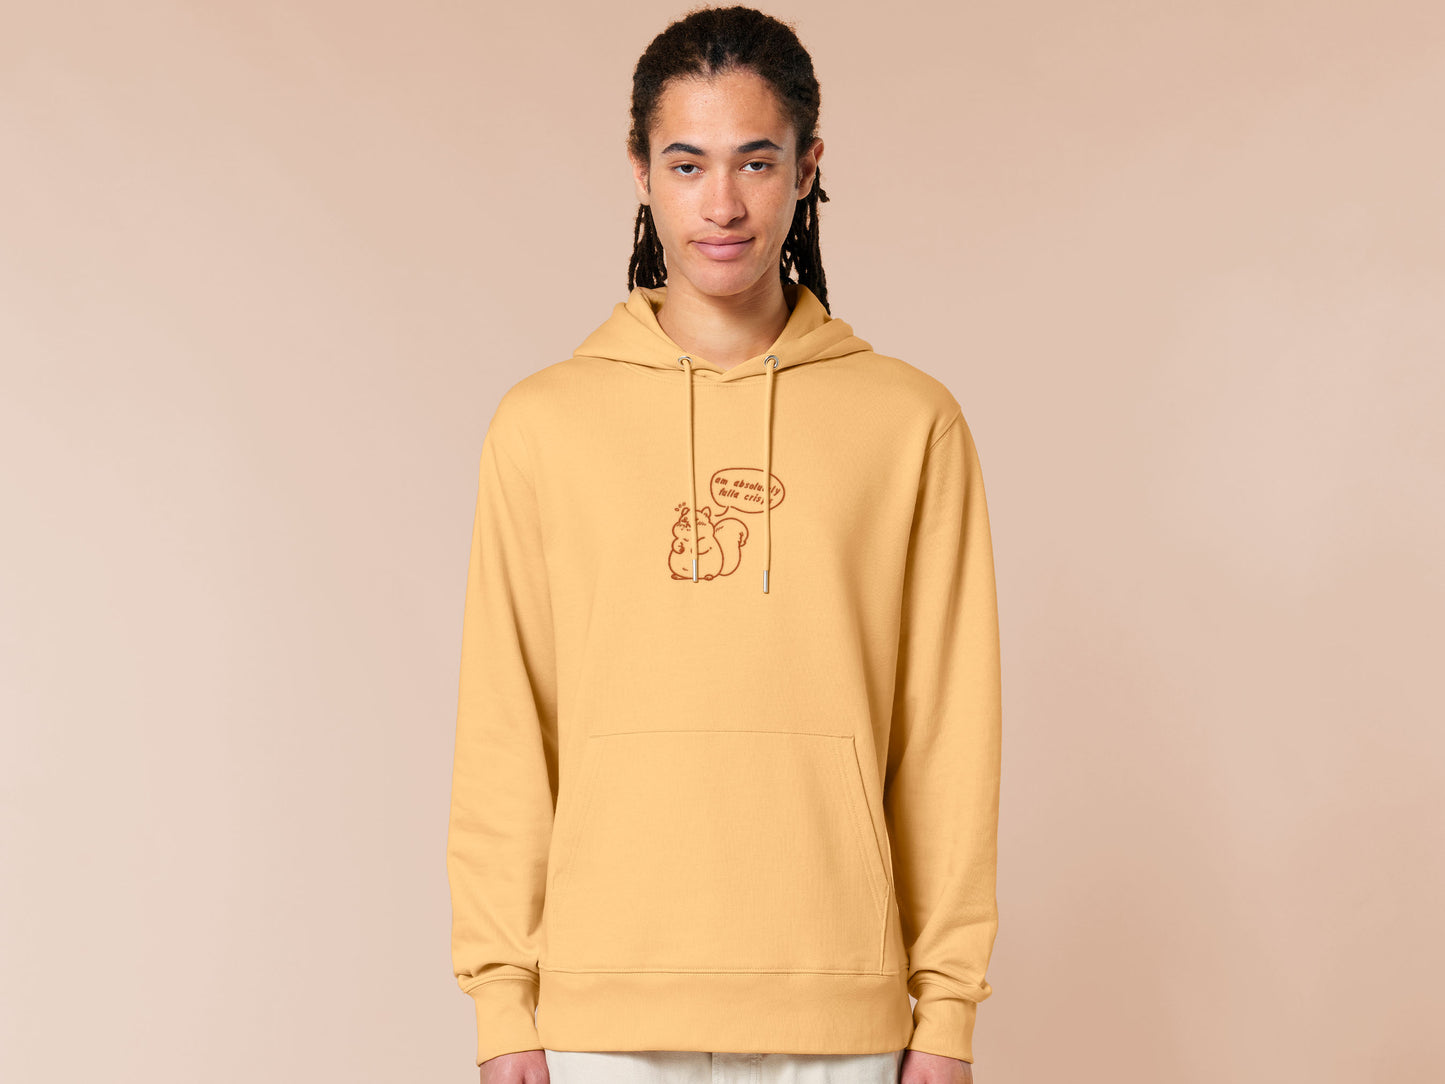 A man wearing a long sleeved yellow fleece hoodie with an embroidered design of a cute fat squirrel and a speech bubble with the text am absolutely fulla crisps